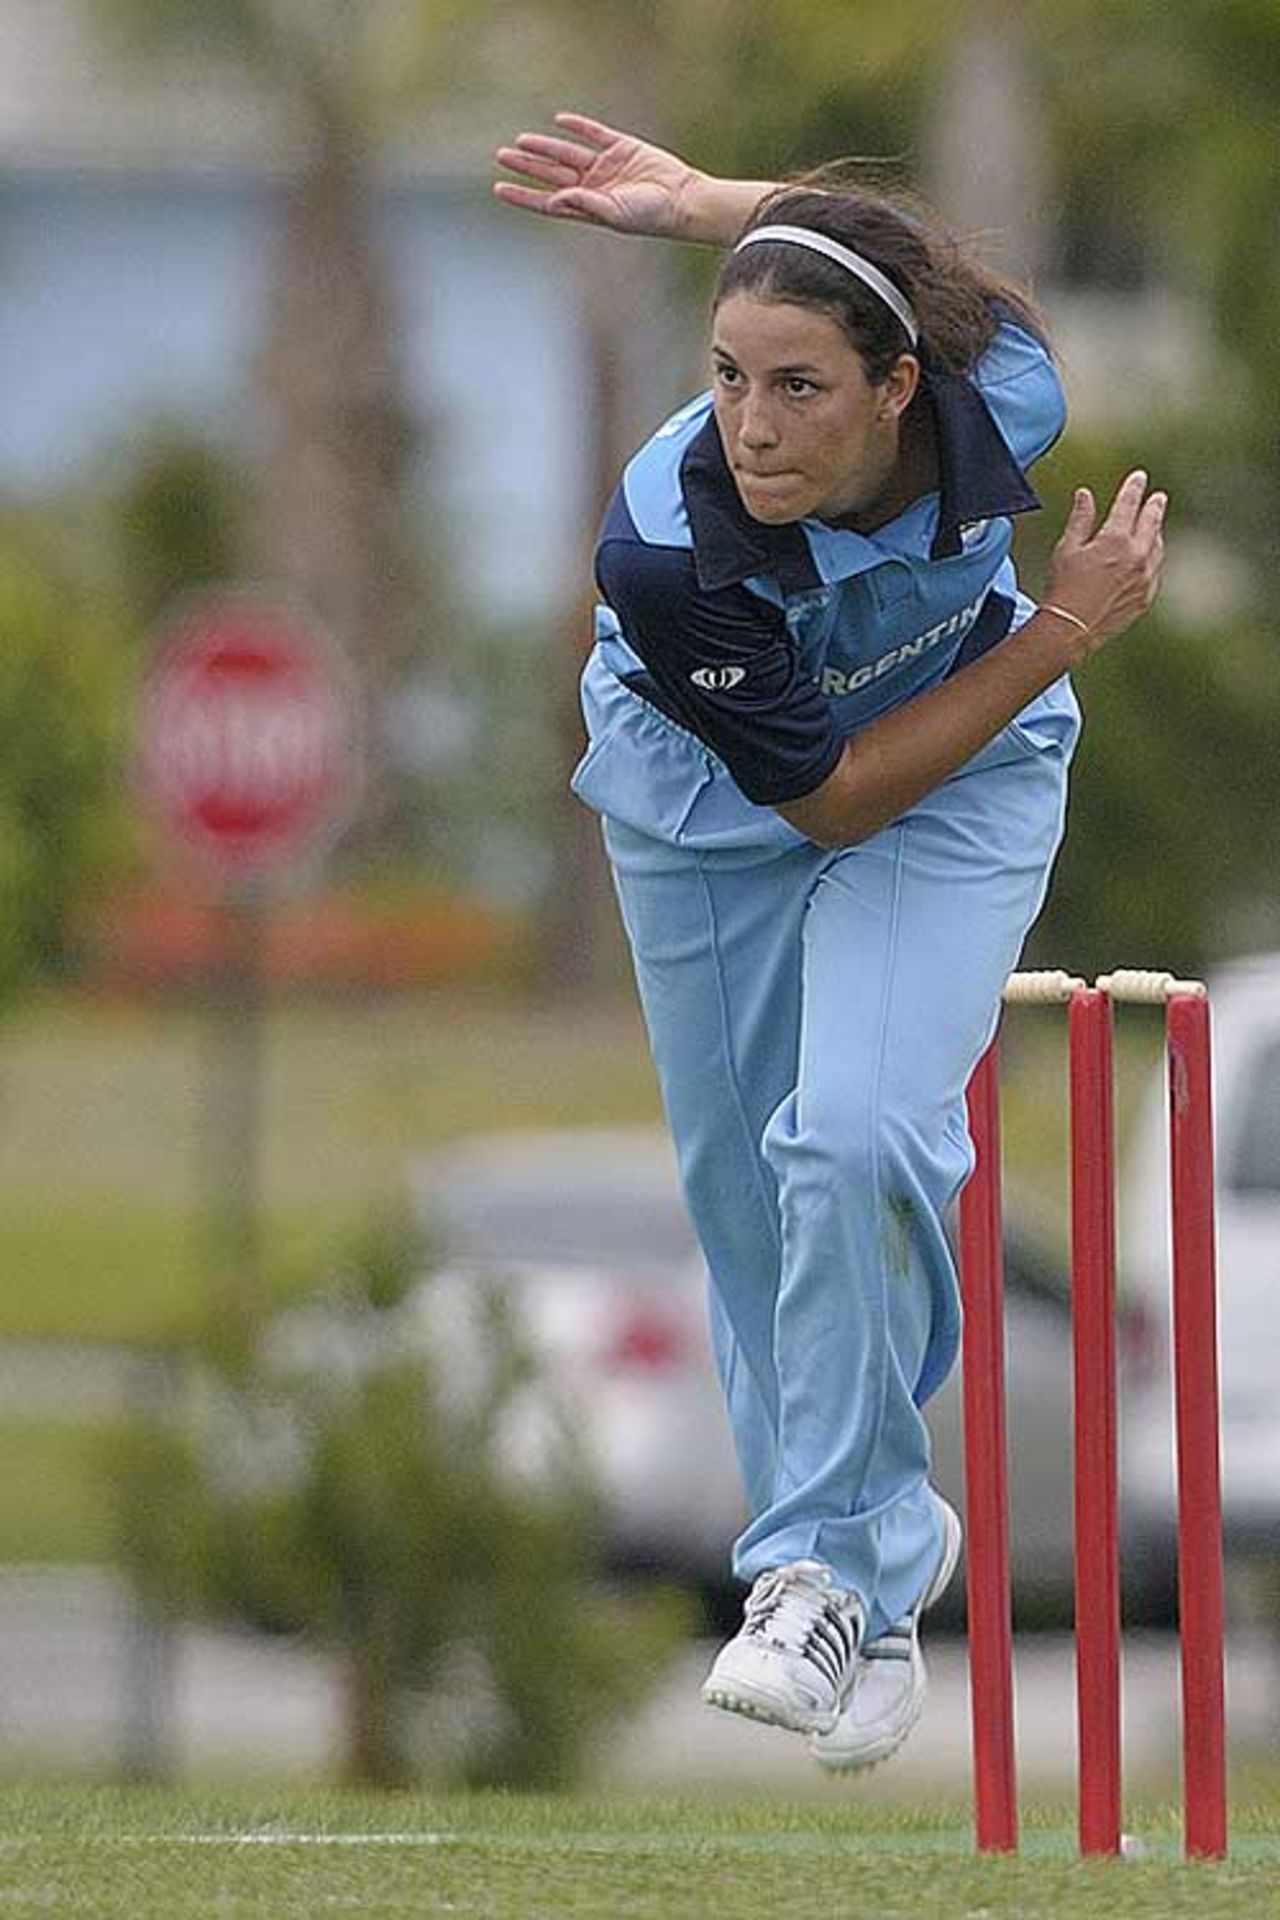 Catalina Greloni bowls against USA, Twenty20 3rd Place Play-off: United States of America Women v Argentina Women, Lauderhill, May 19, 2009